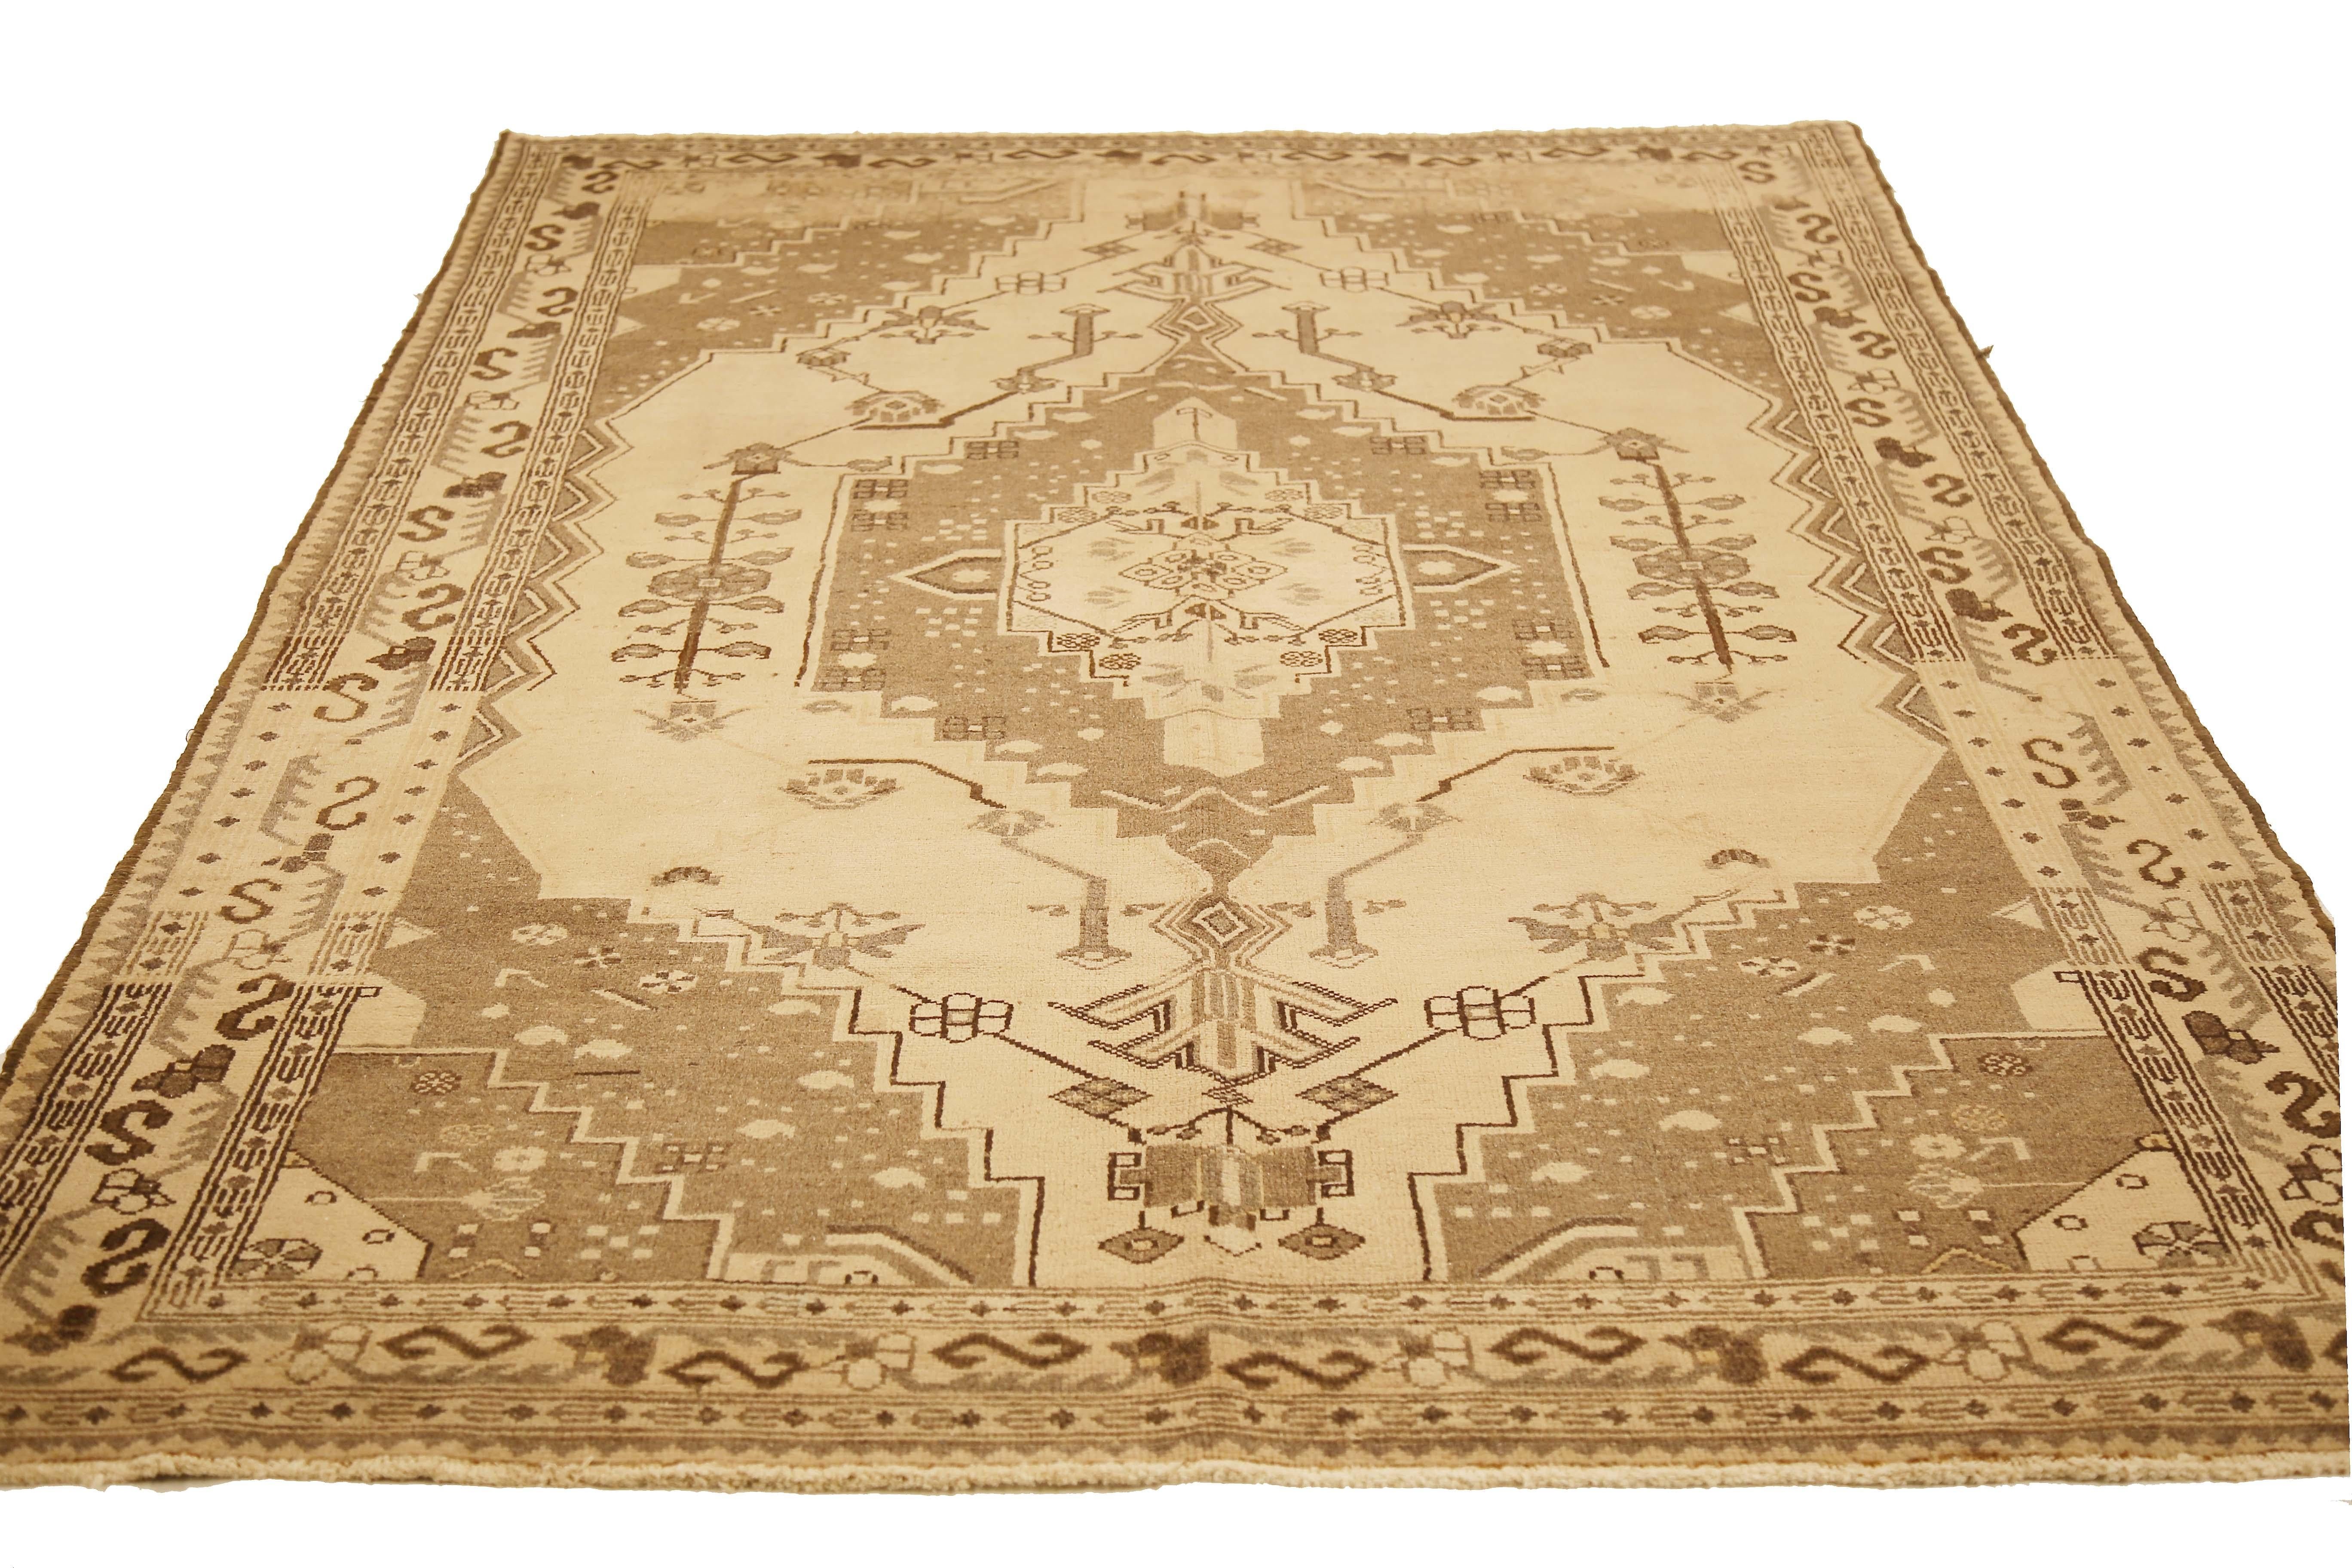 Antique Persian rug handwoven from the finest sheep’s wool and colored with all-natural vegetable dyes that are safe for humans and pets. It’s a traditional Saveh design highlighted by a large gray and brown botanical medallion on its center field.